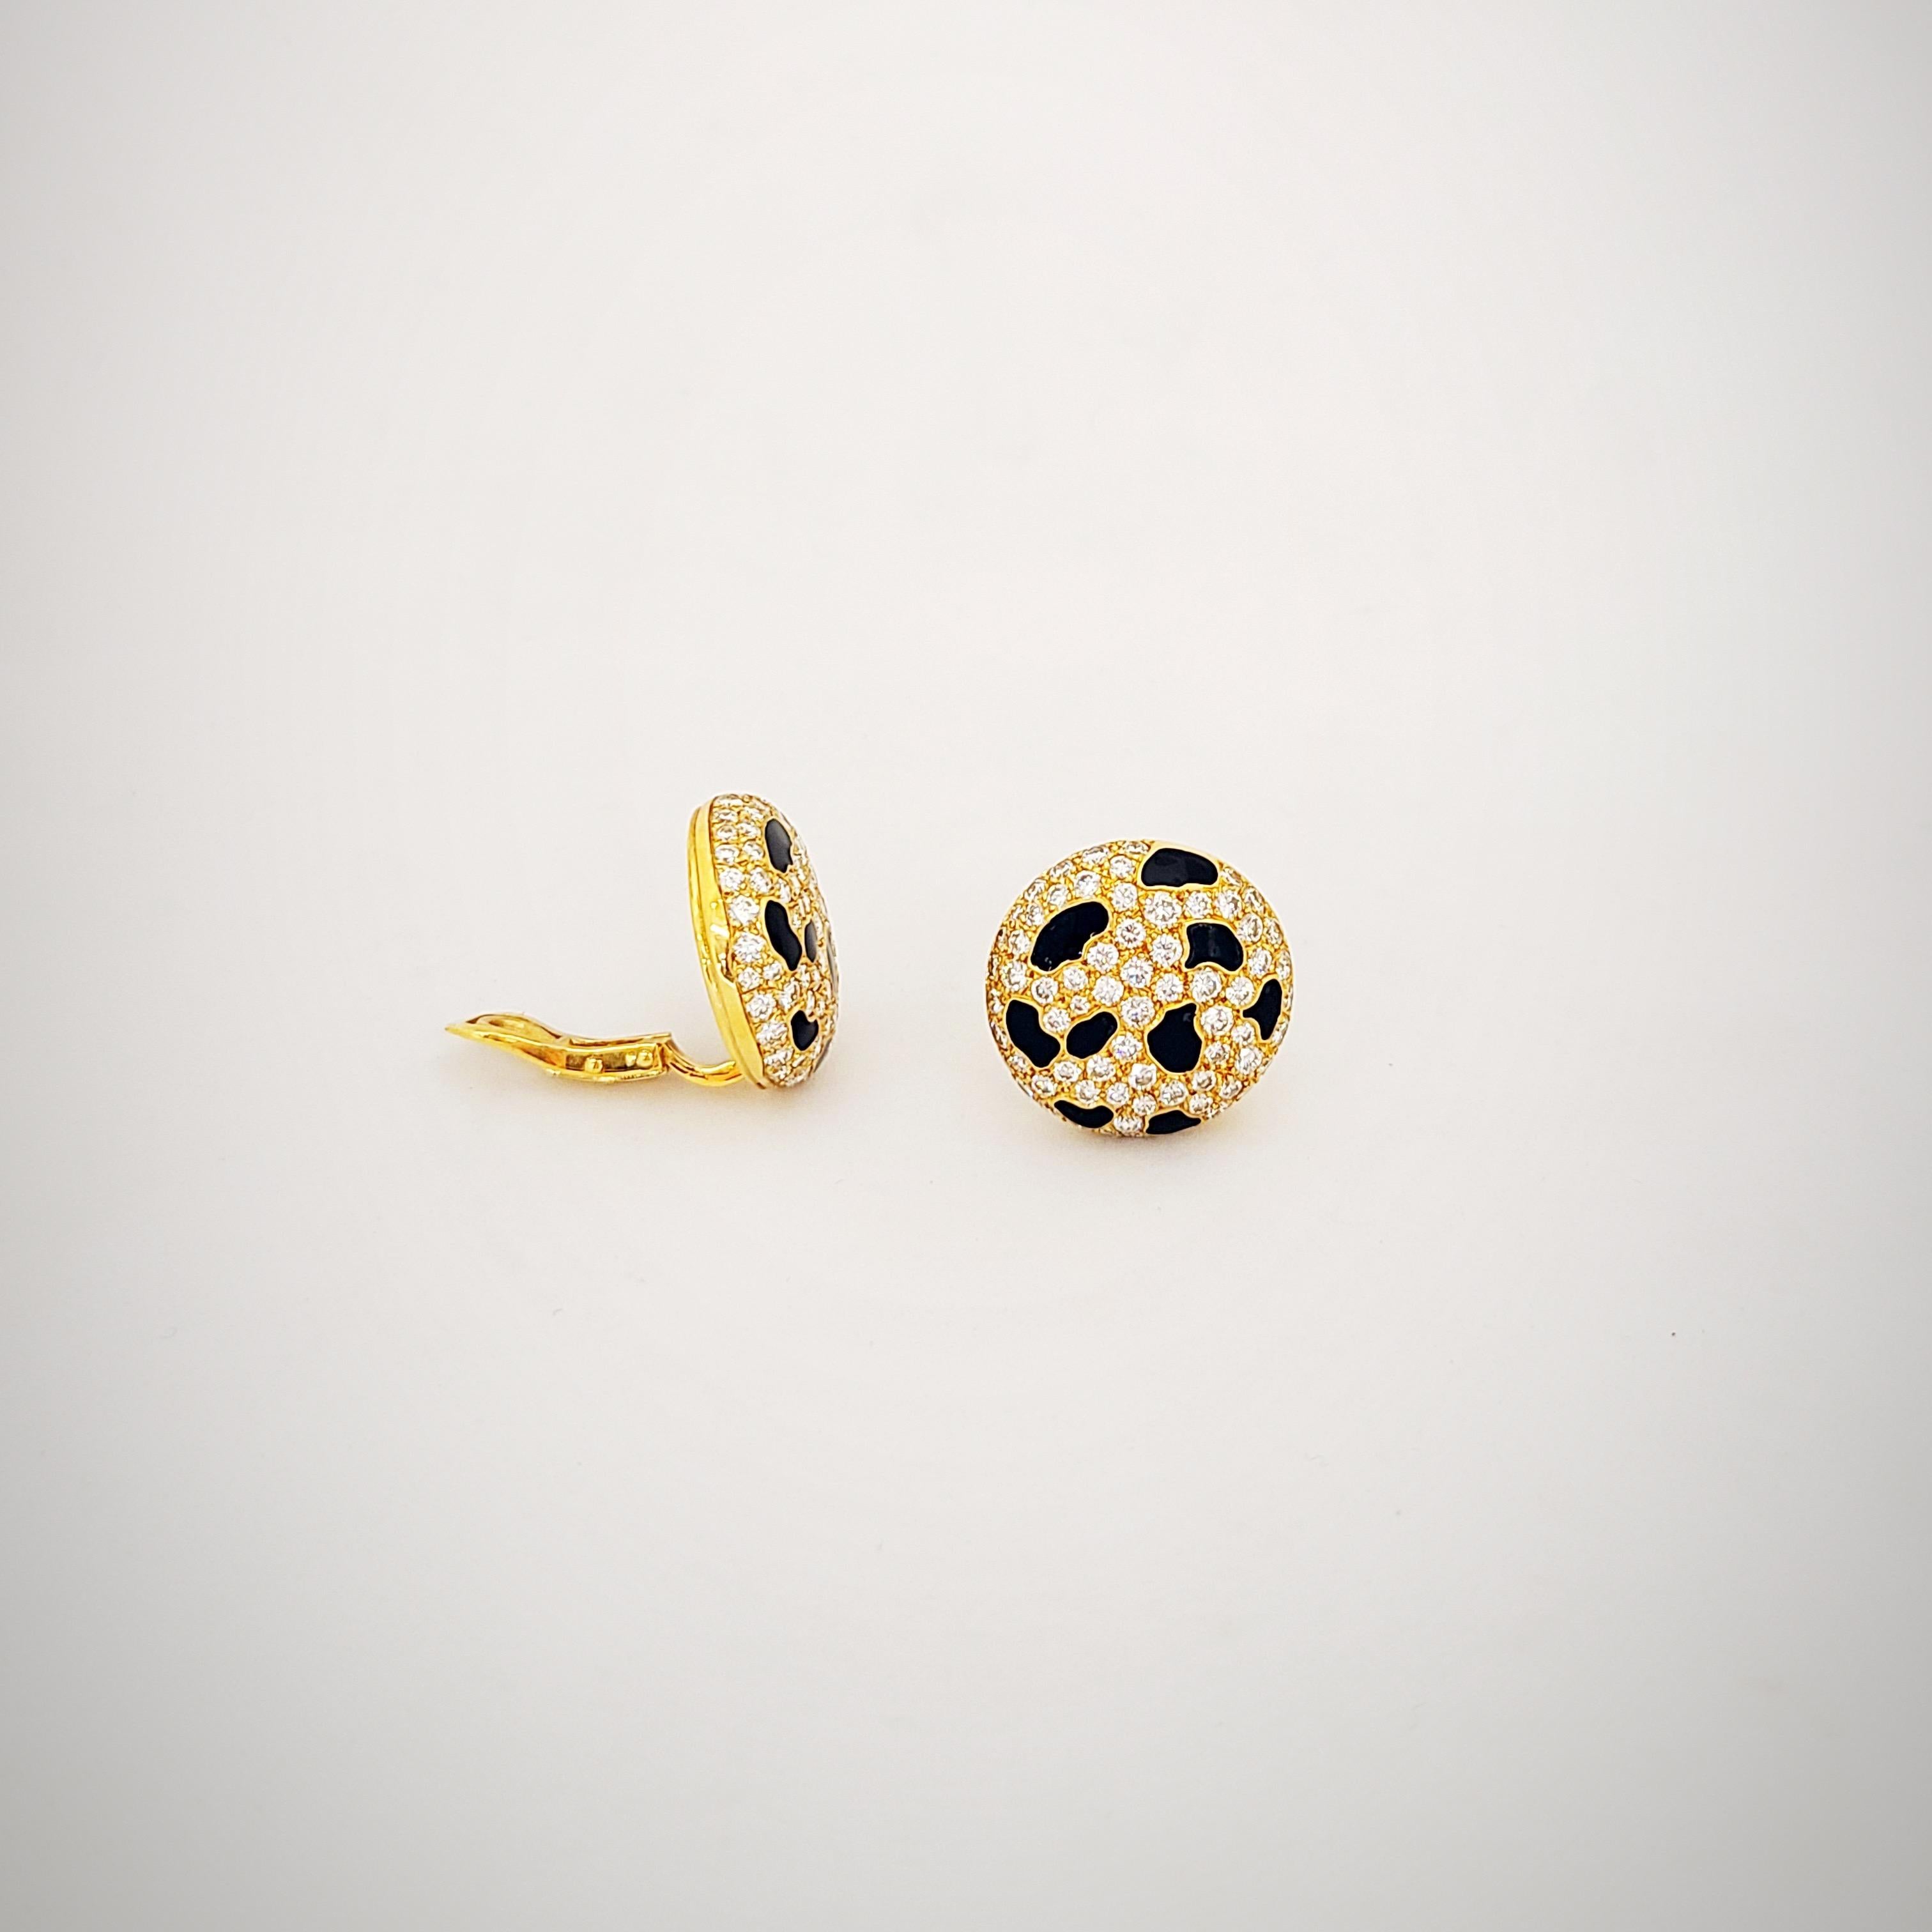 Round Cut Gay Freres 18KT. Yellow Gold, 4.64 Carat Diamond & Black Enamel Button Earrings For Sale